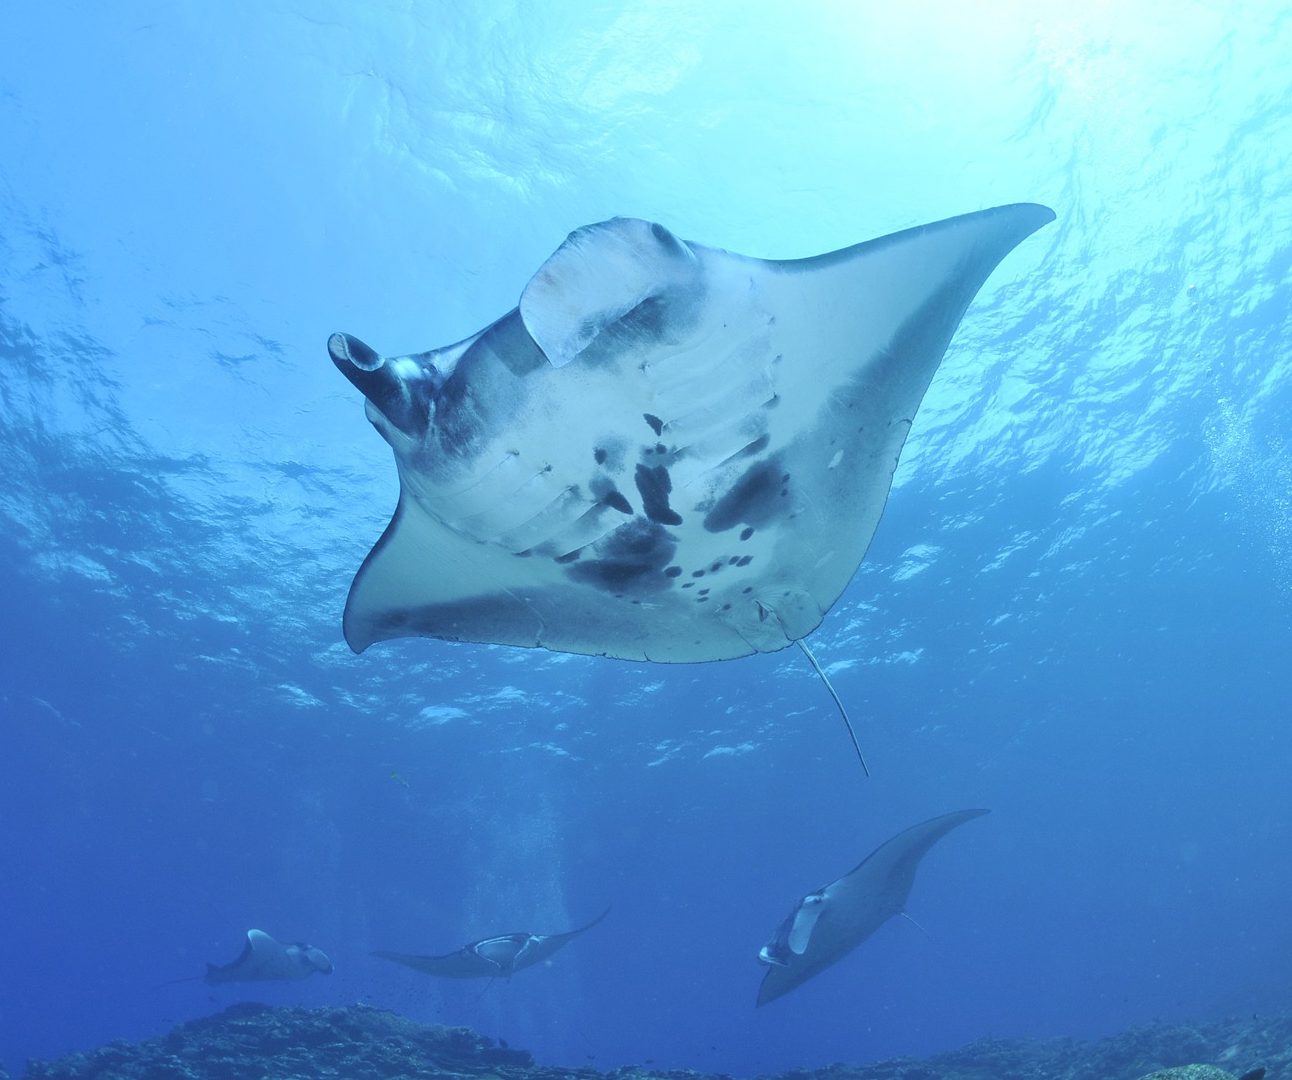 Underwater image of the underneath of a manta ray